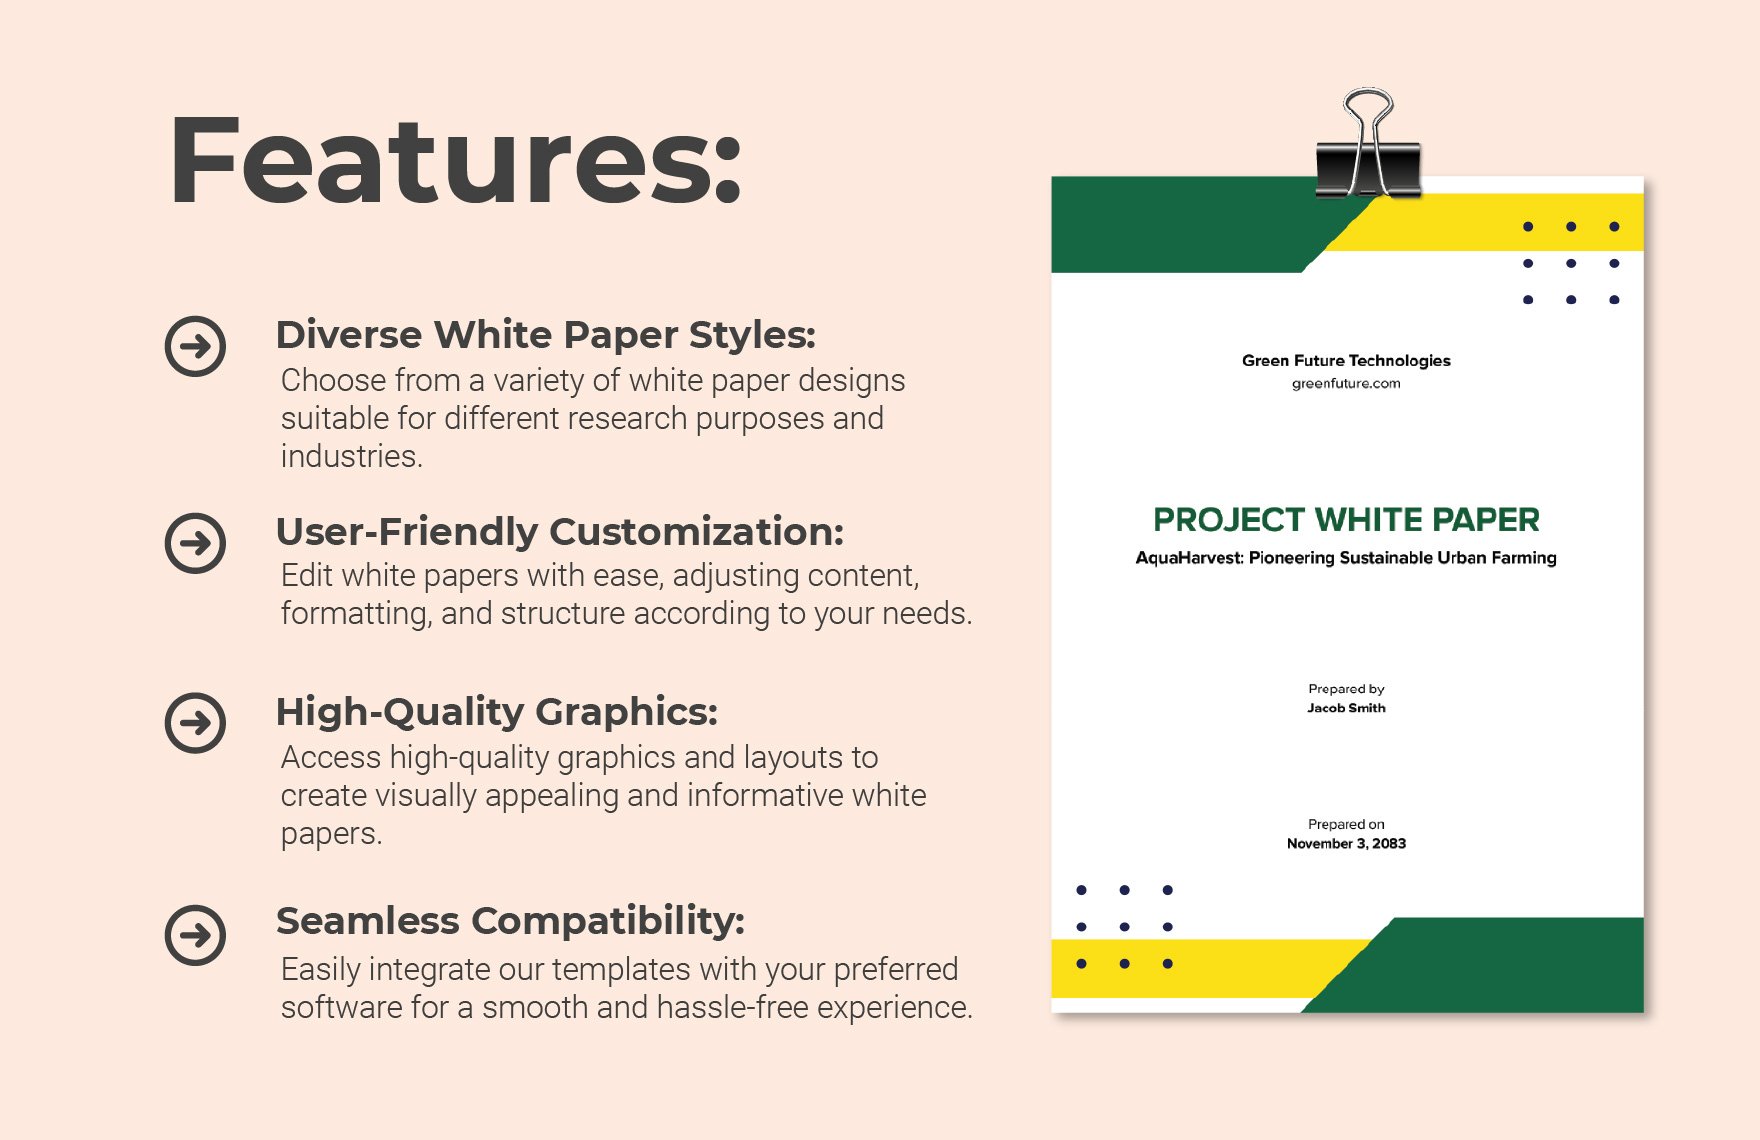 Project White Paper Template